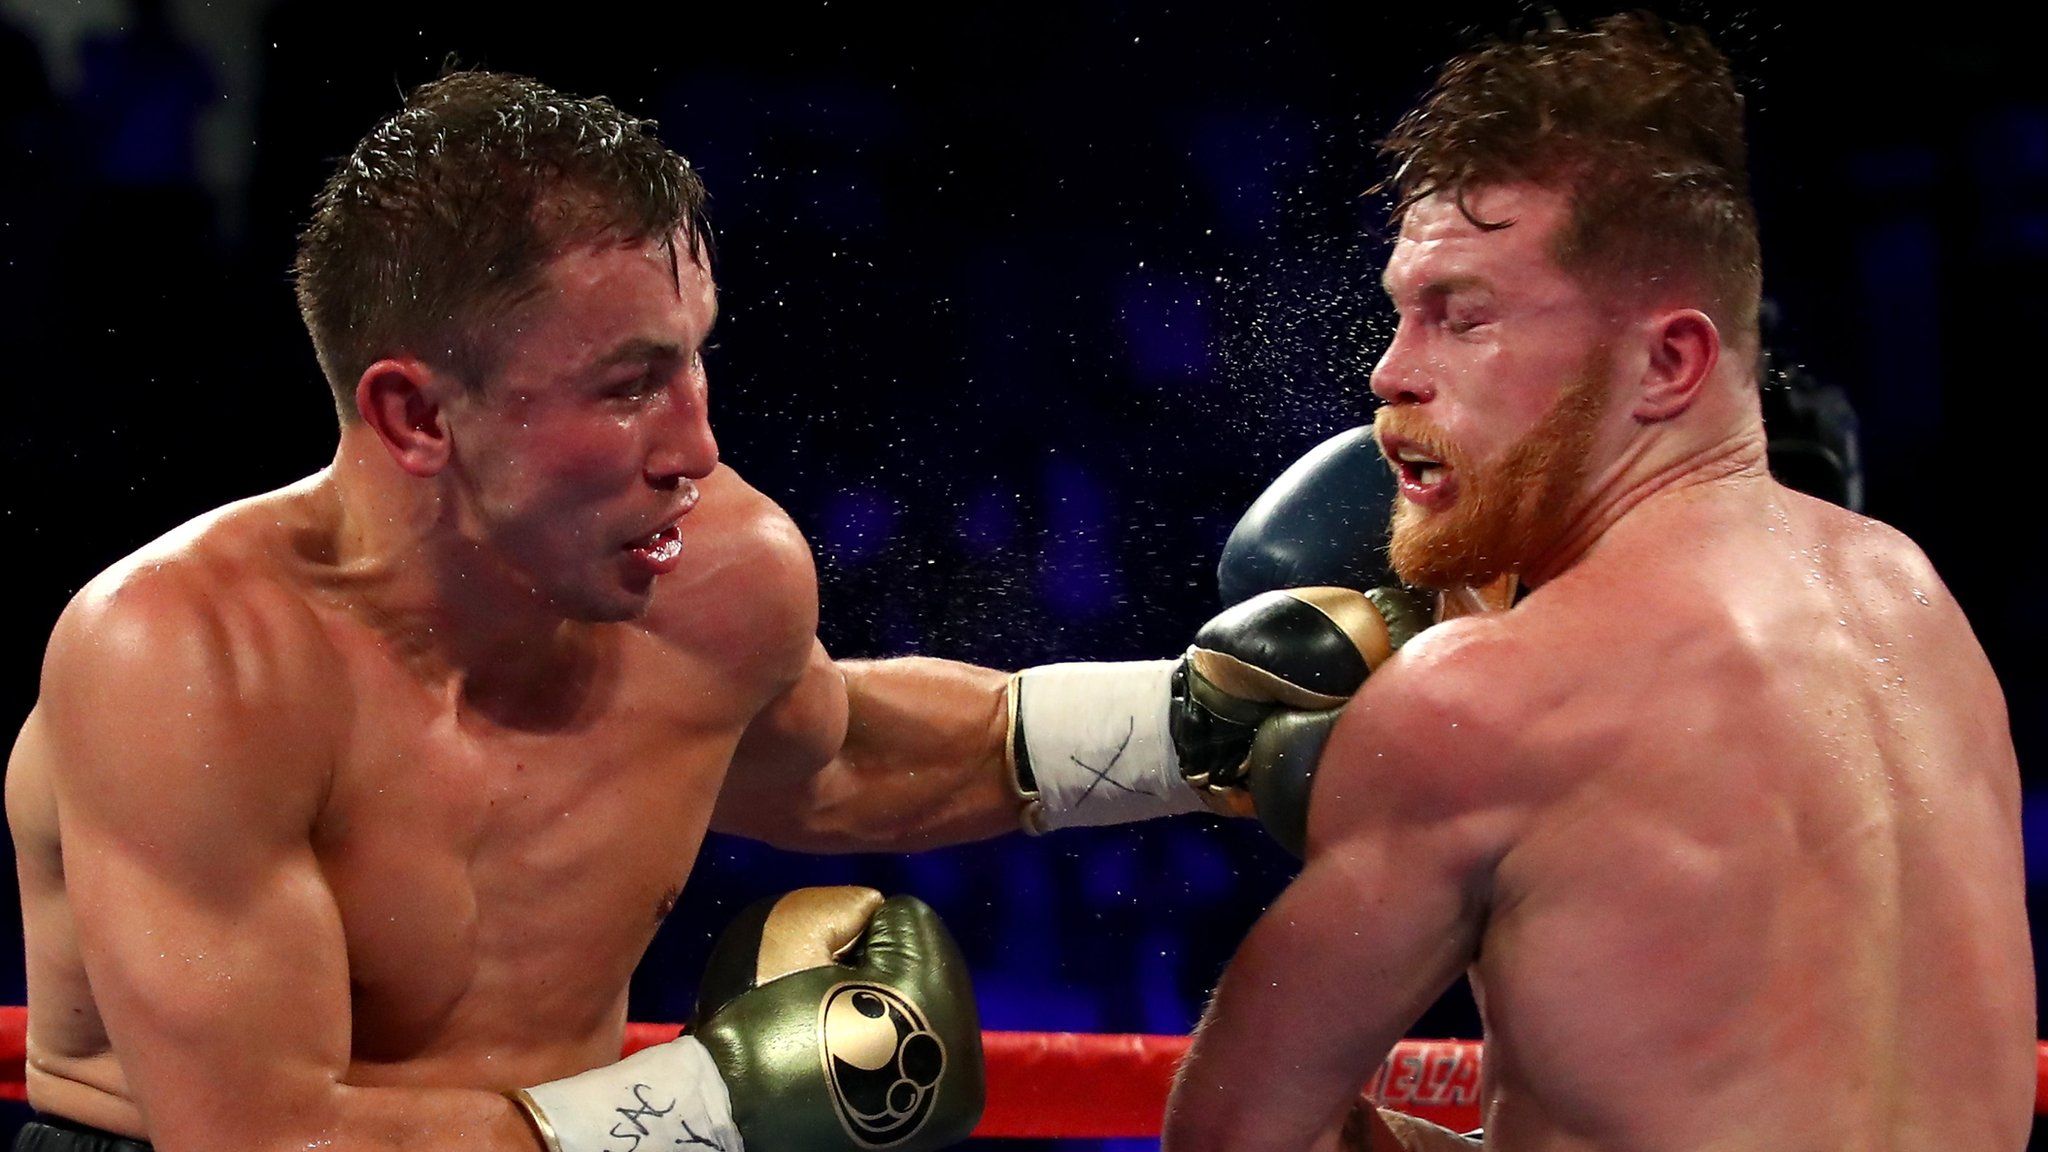 Gennady Golovkin punches Saul Alvarez during their world middleweight title fight in September 2017